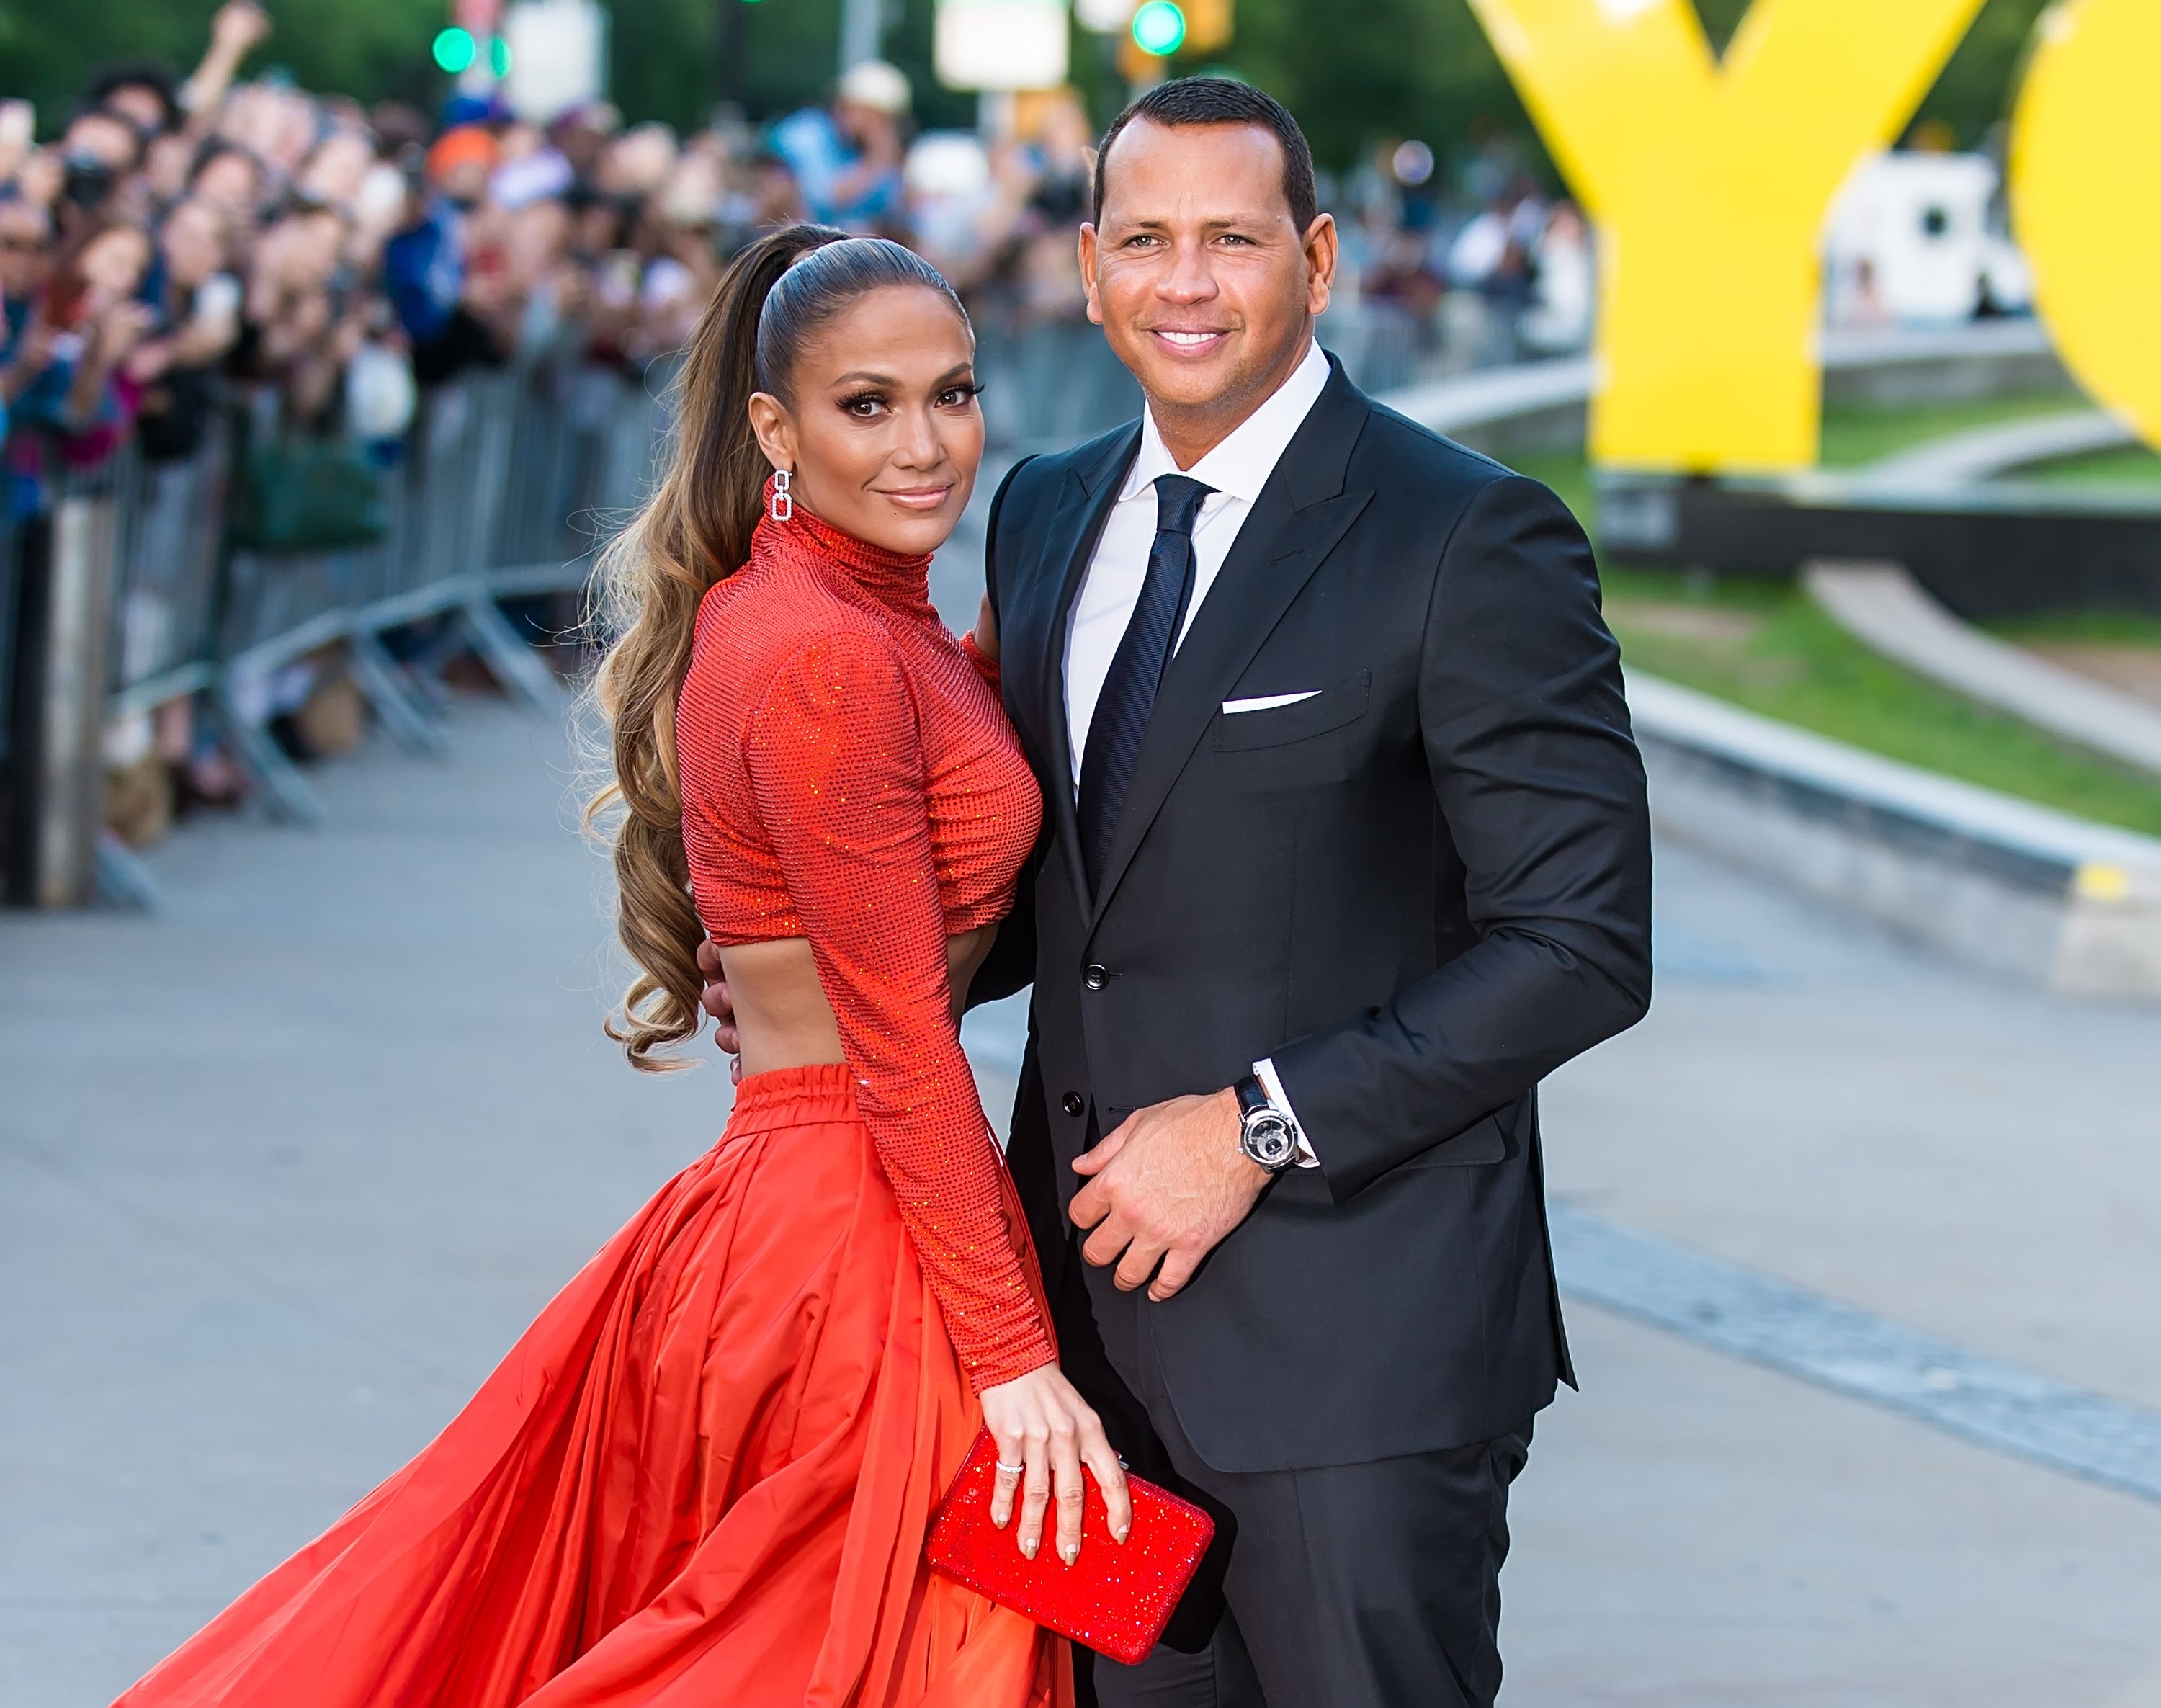 Jennifer Lopez and Alex Rodriguez at the CFDA Fashion Awards on June 3, 2019, in New York City | Photo: Gilbert Carrasquillo/GC Images/Getty Images